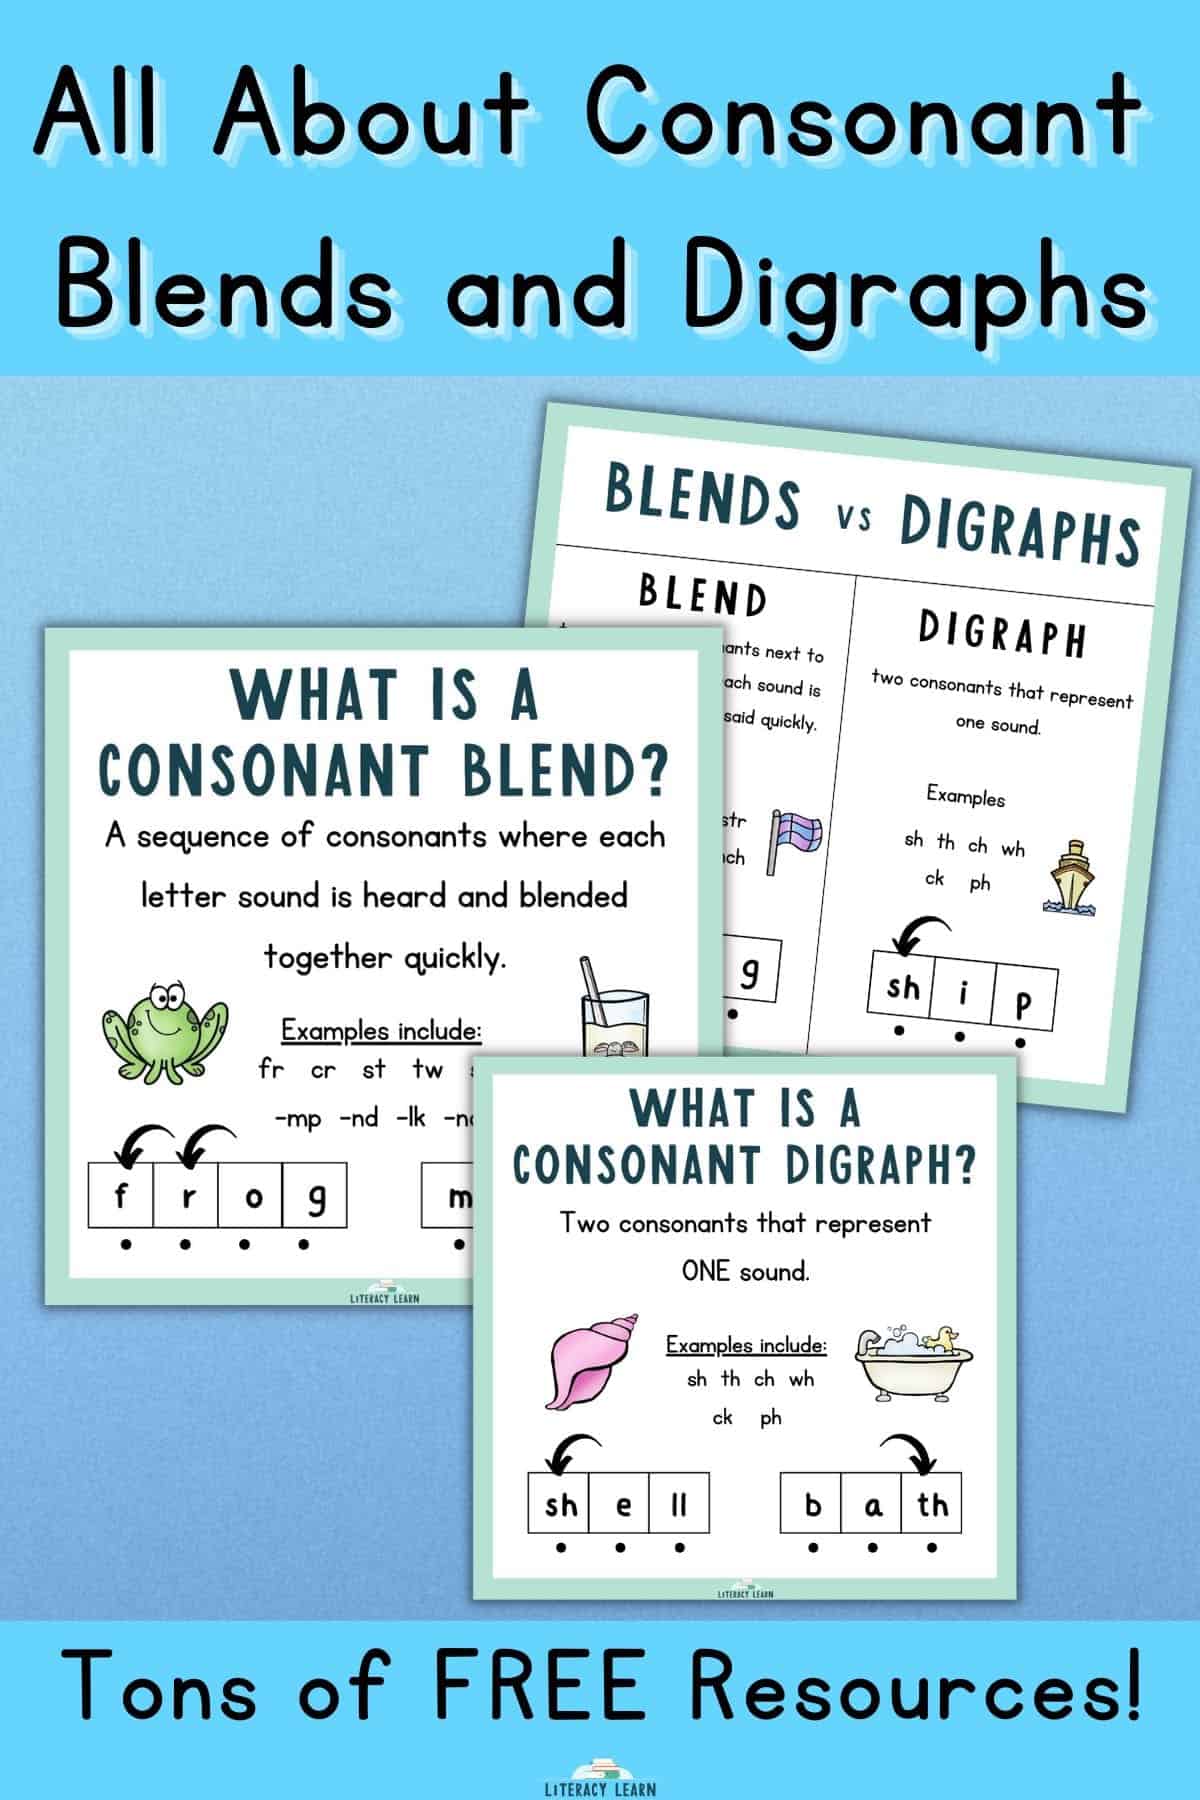 Graphic titled 'All About Blends and Digraphs' 3pictures of anchor charts on blue background.